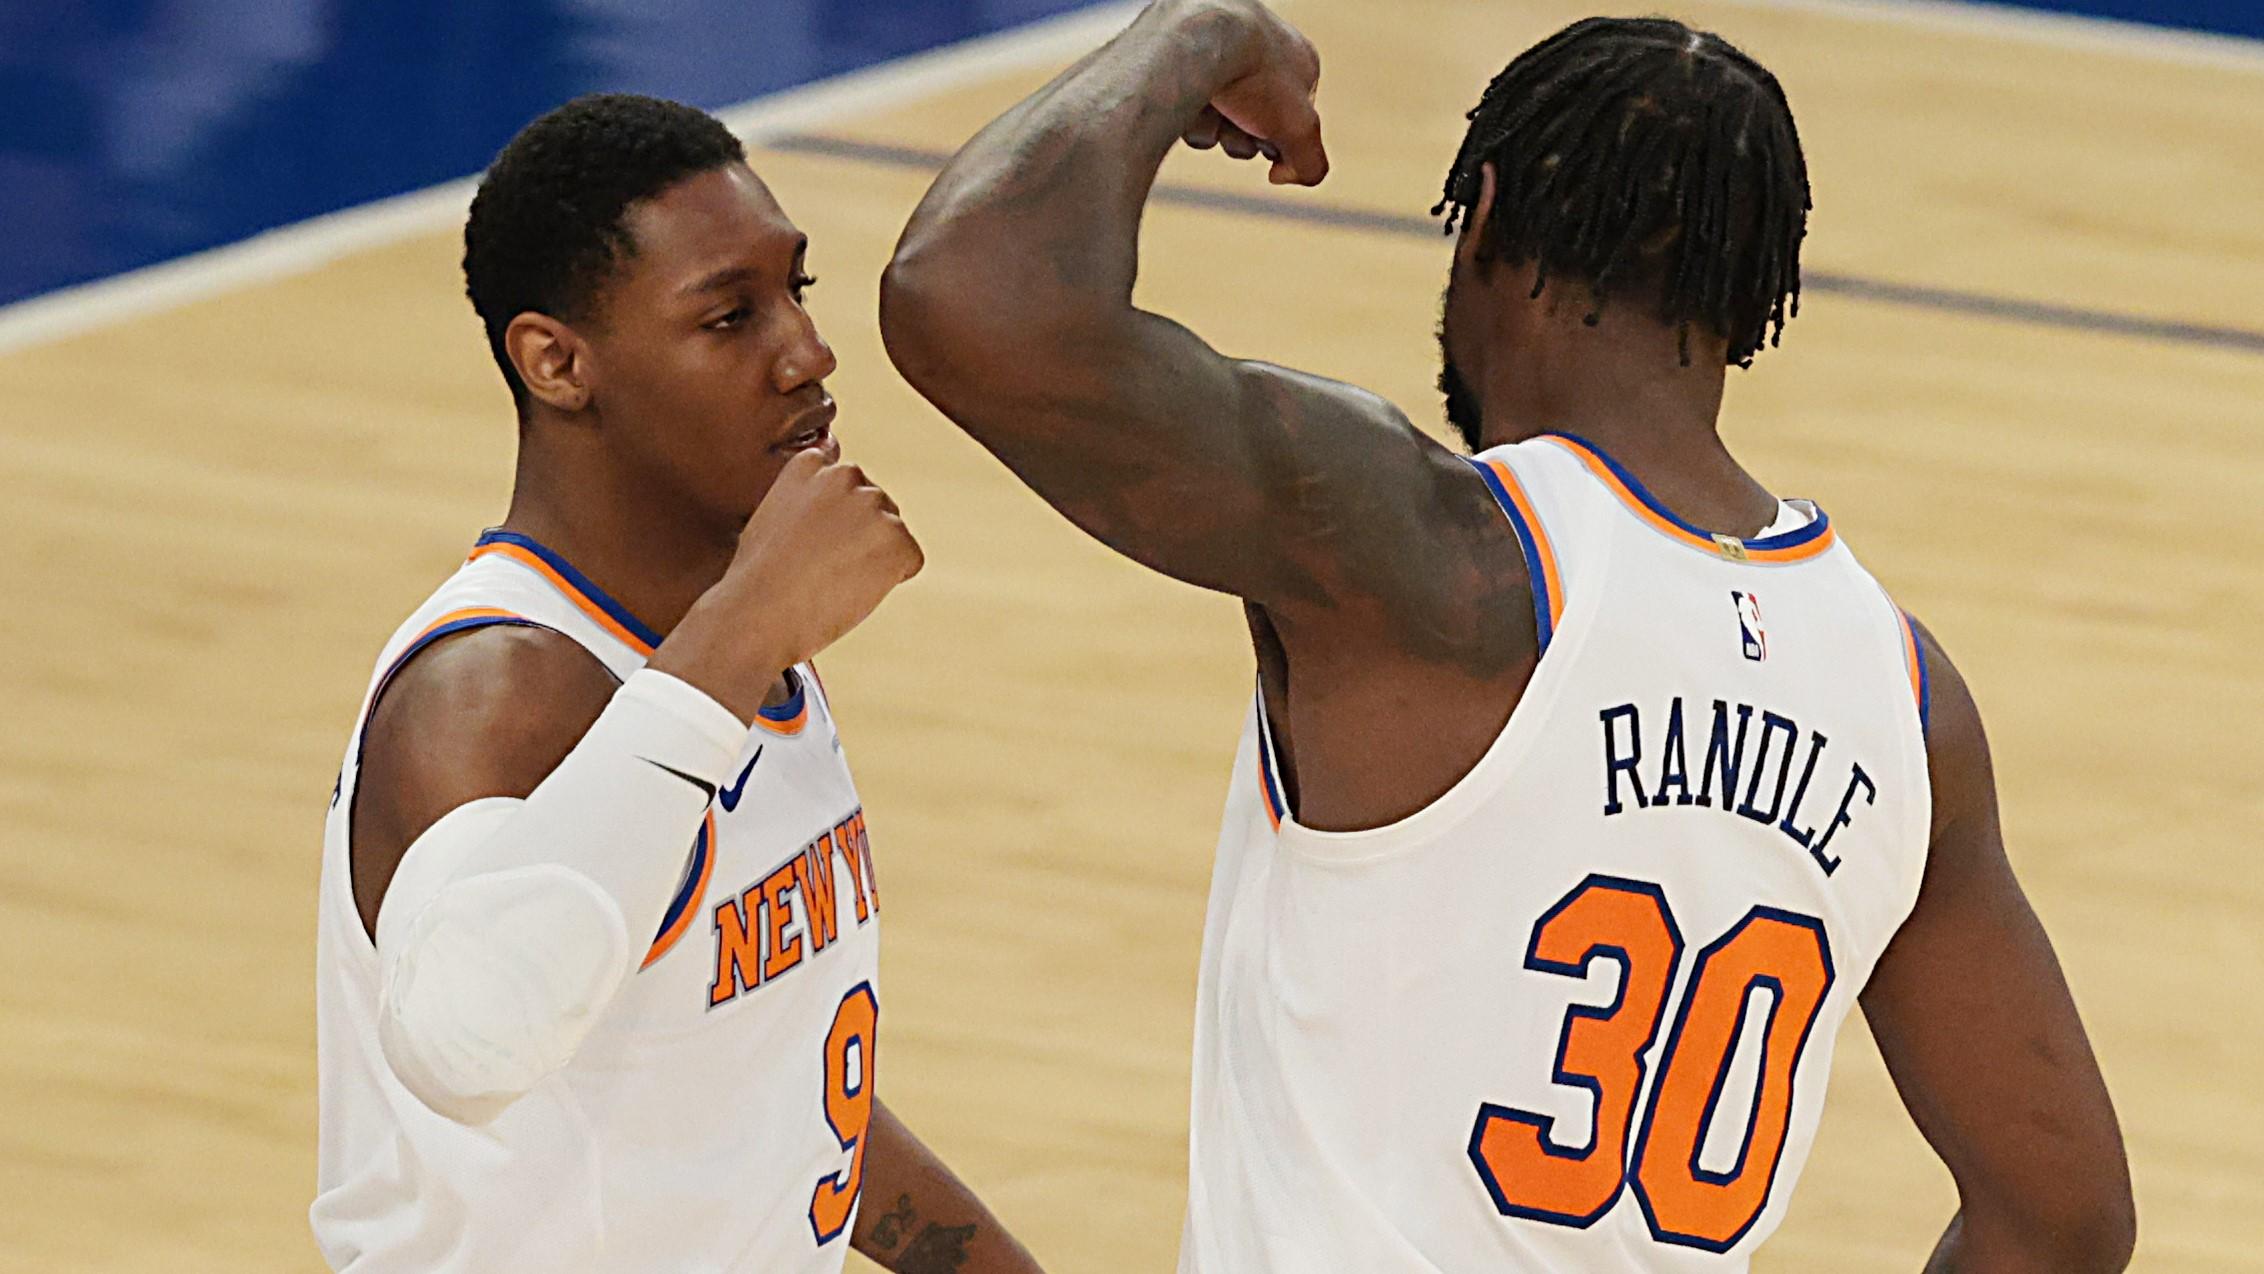 May 16, 2021; New York, New York, USA; New York Knicks forward Julius Randle (30) celebrates with guard RJ Barrett (9) during the first half against the Boston Celtics at Madison Square Garden. Mandatory Credit: Vincent Carchietta-USA TODAY Sports / Vincent Carchietta-USA TODAY Sports